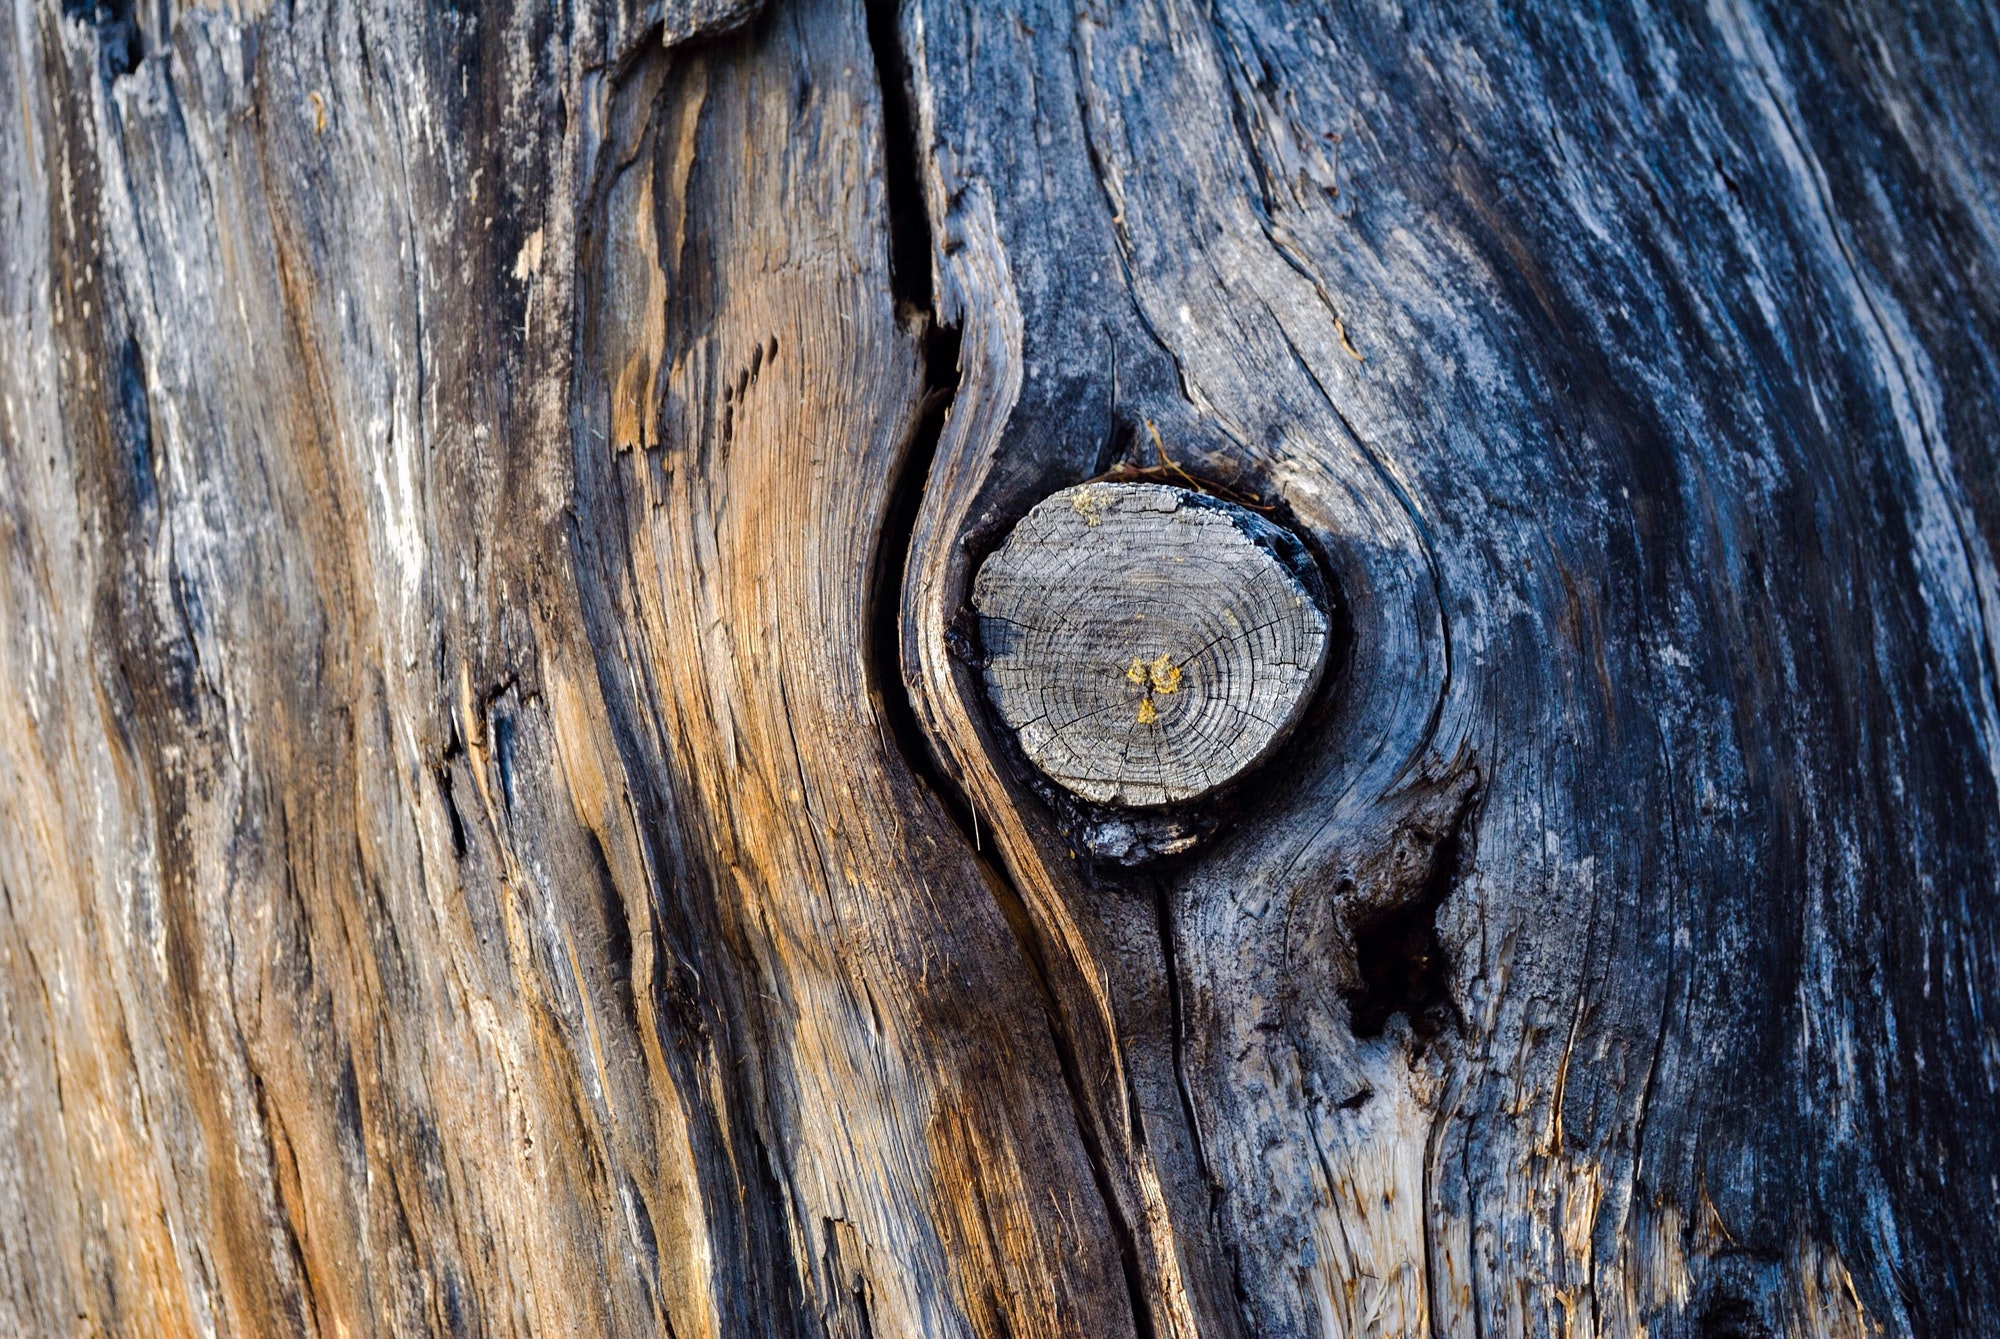 Tree trunk with knot feature